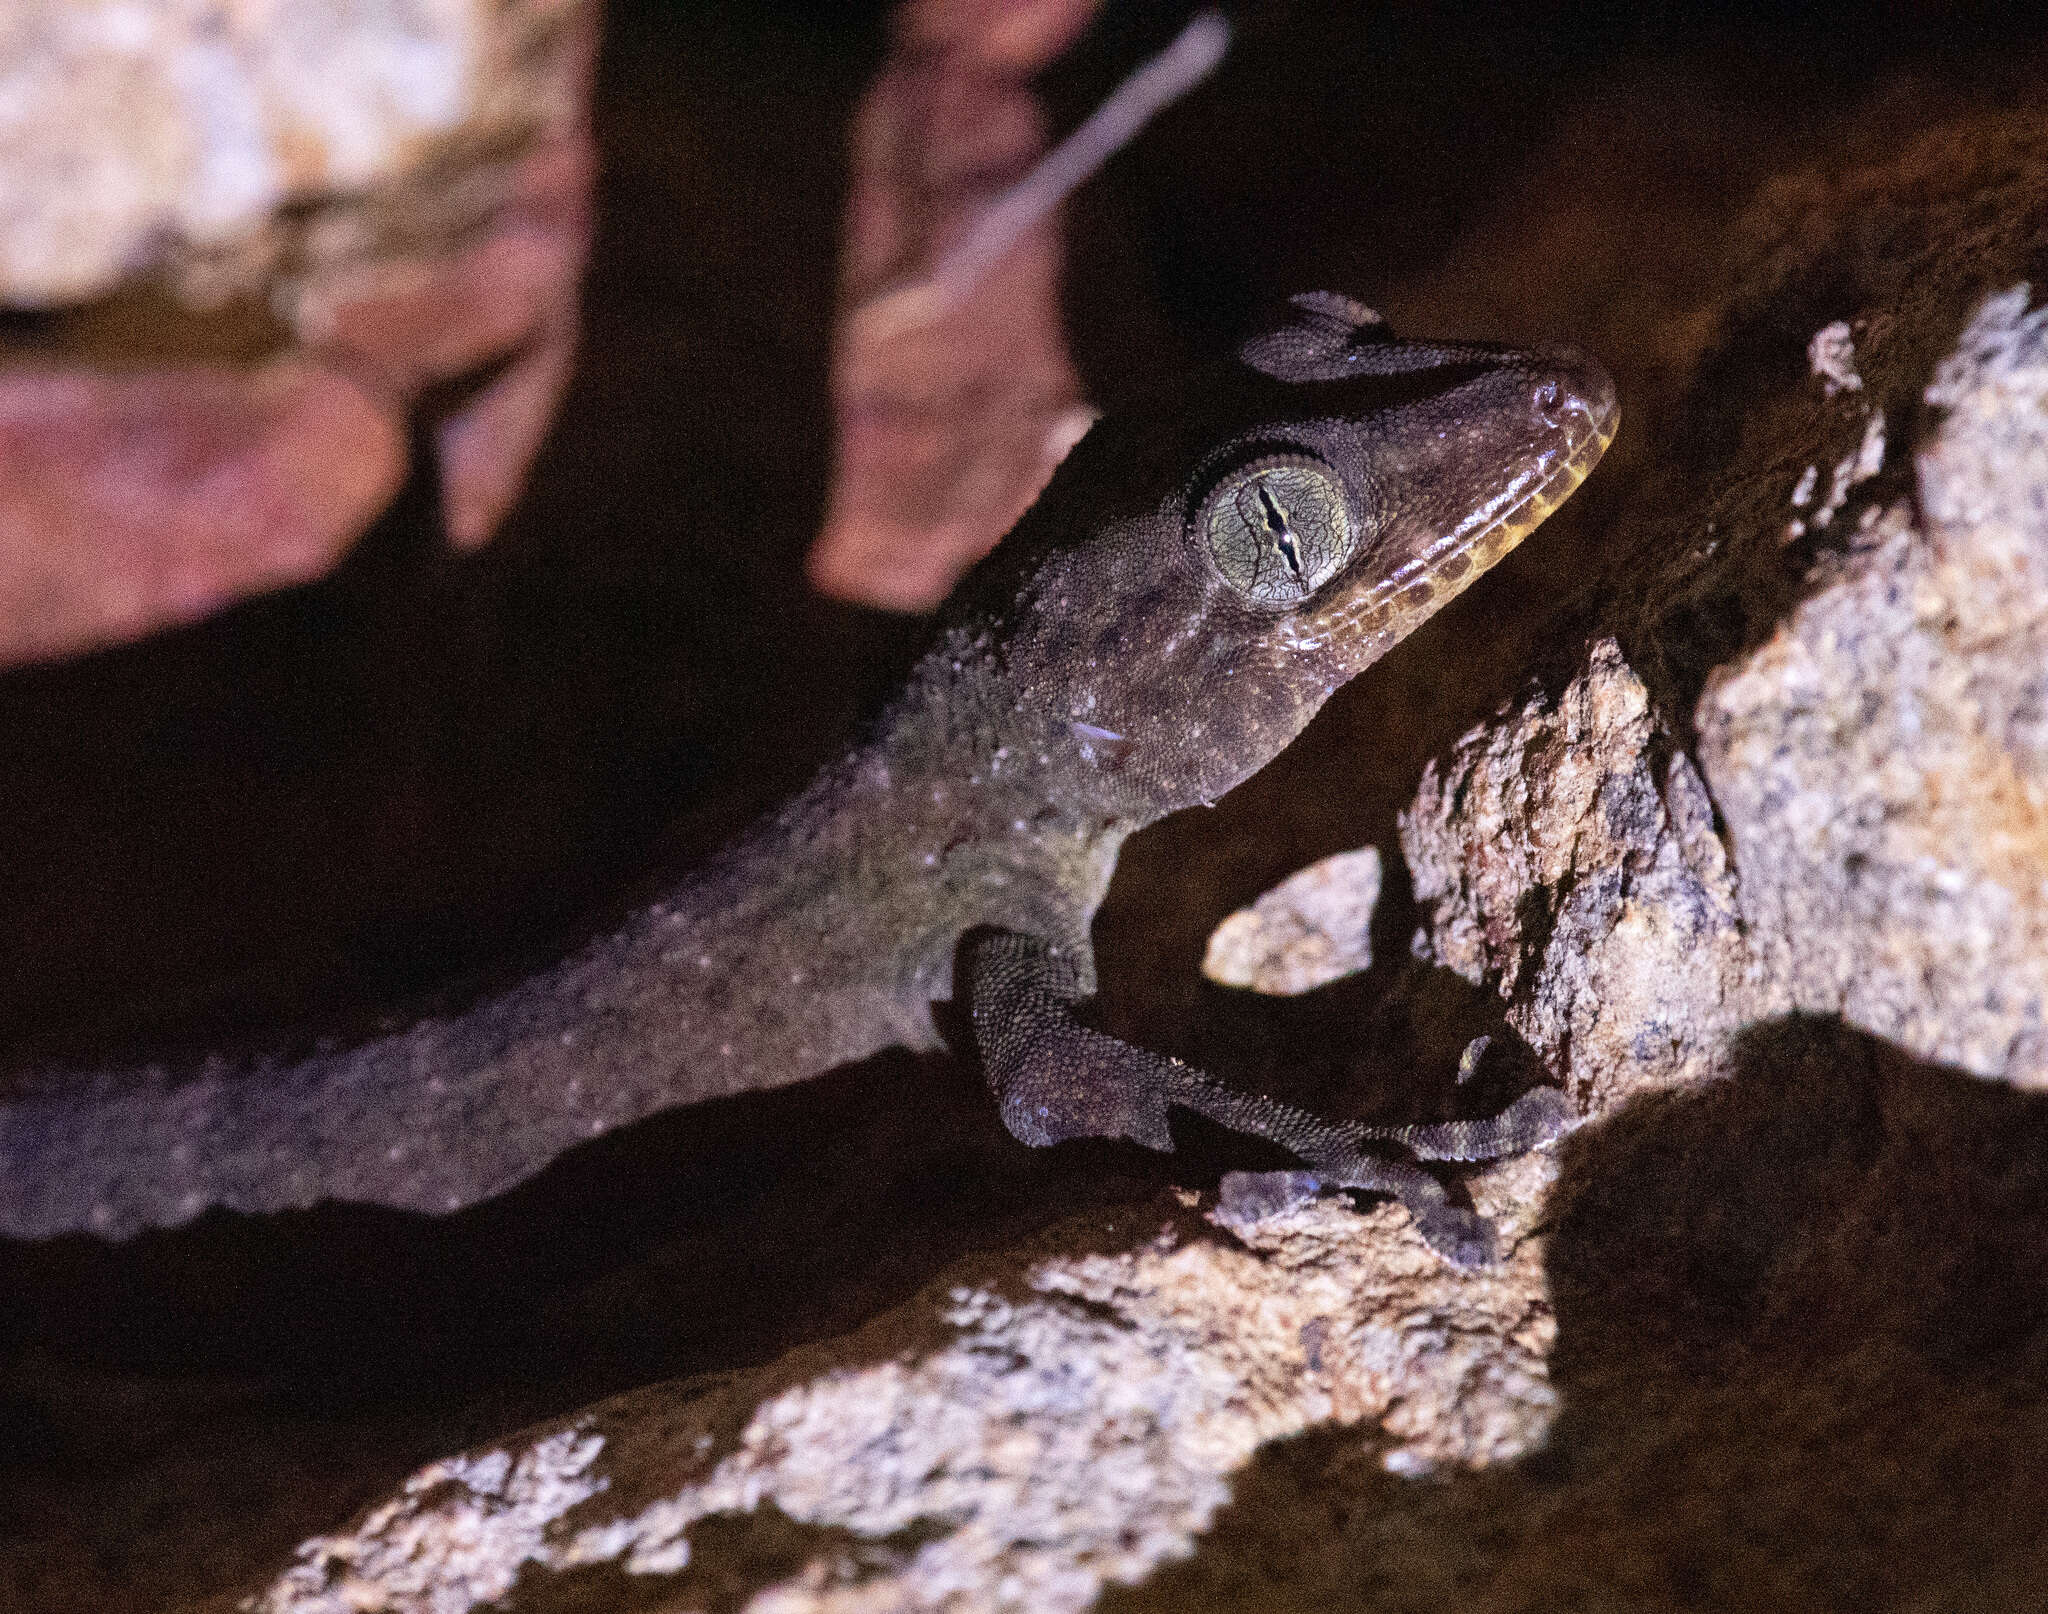 Image of Taylor's Gecko